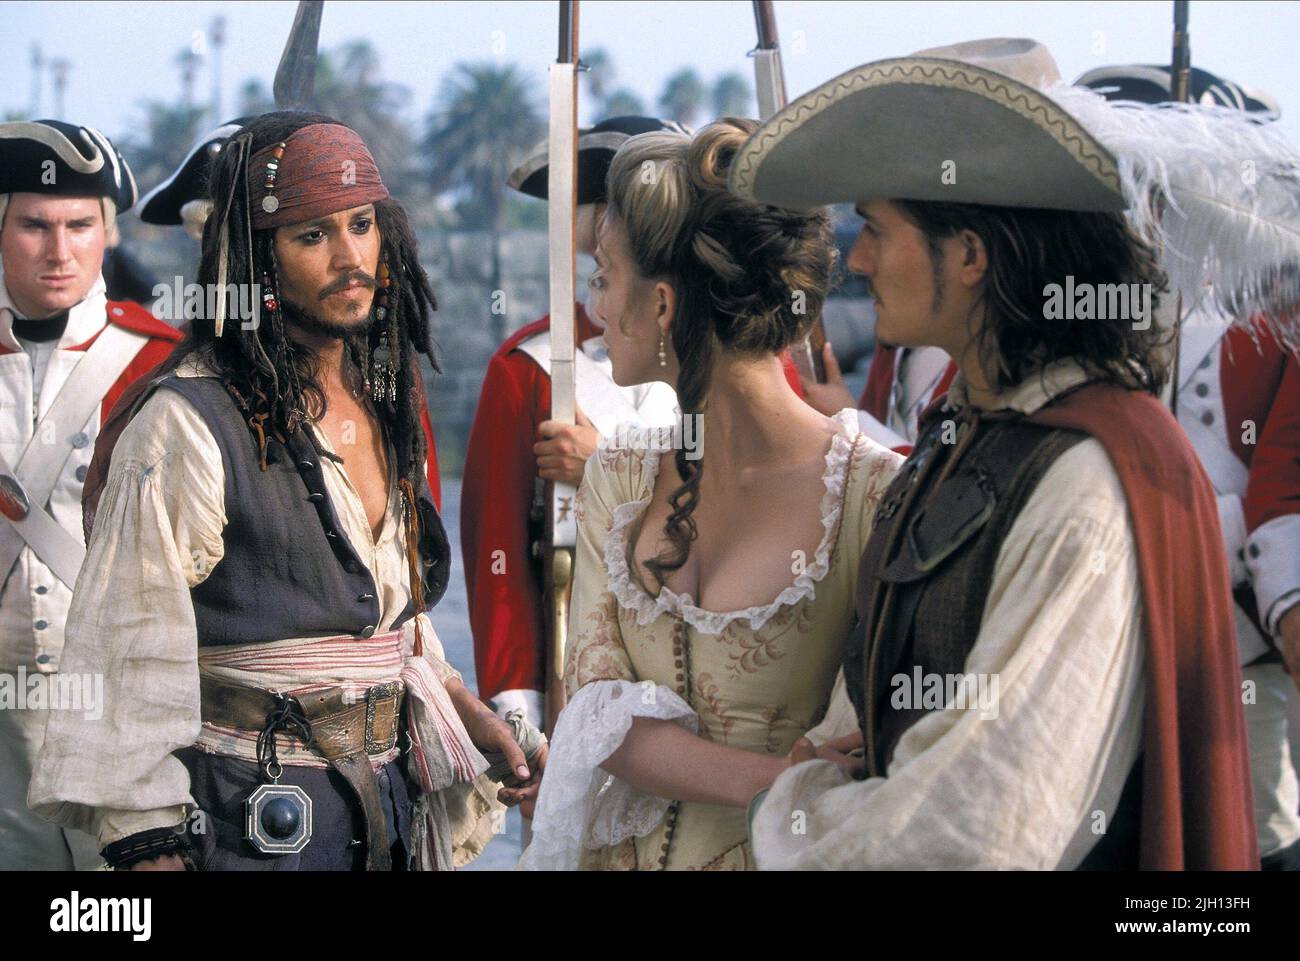 DEPP,KNIGHTLEY,BLOOM, PIRATES OF THE CARIBBEAN: THE CURSE OF THE BLACK PEARL, 2003 Stock Photo